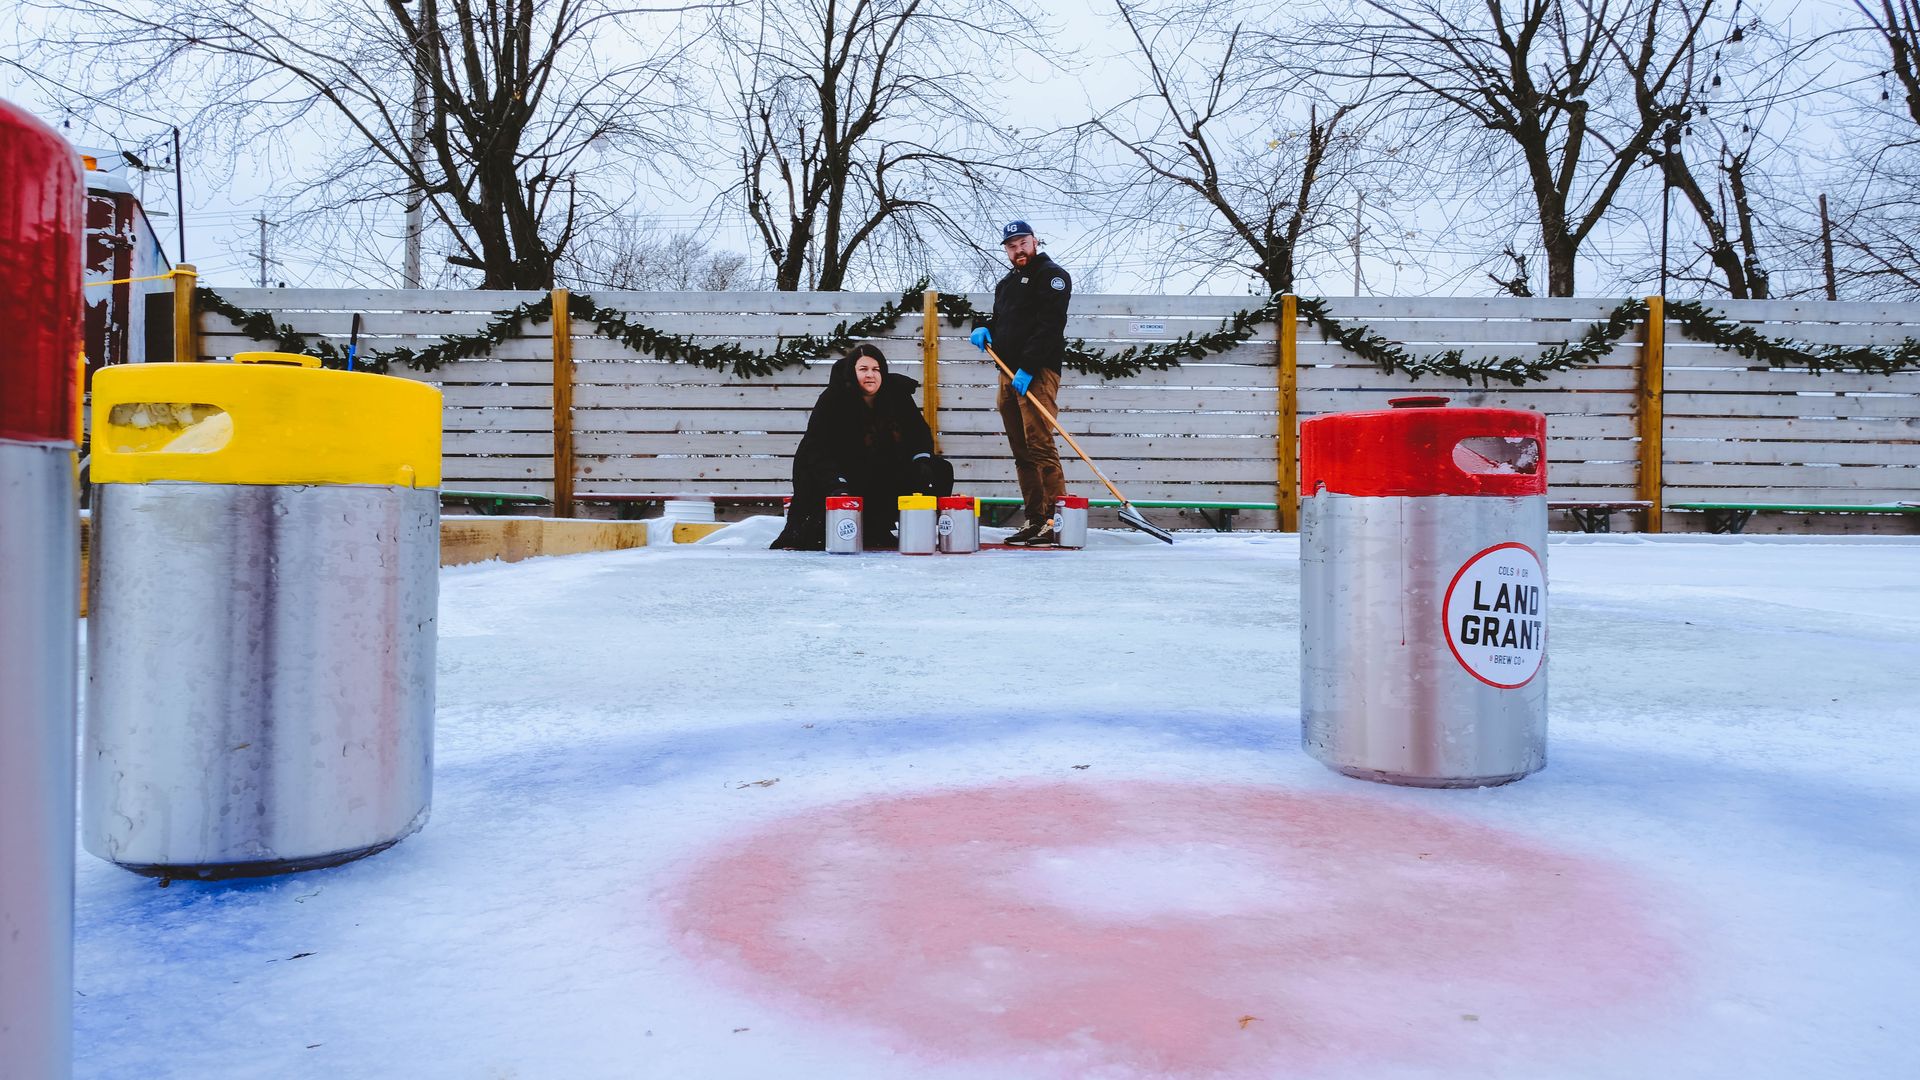 Two people watch beer kegs slide on ice at the end of a curling rink